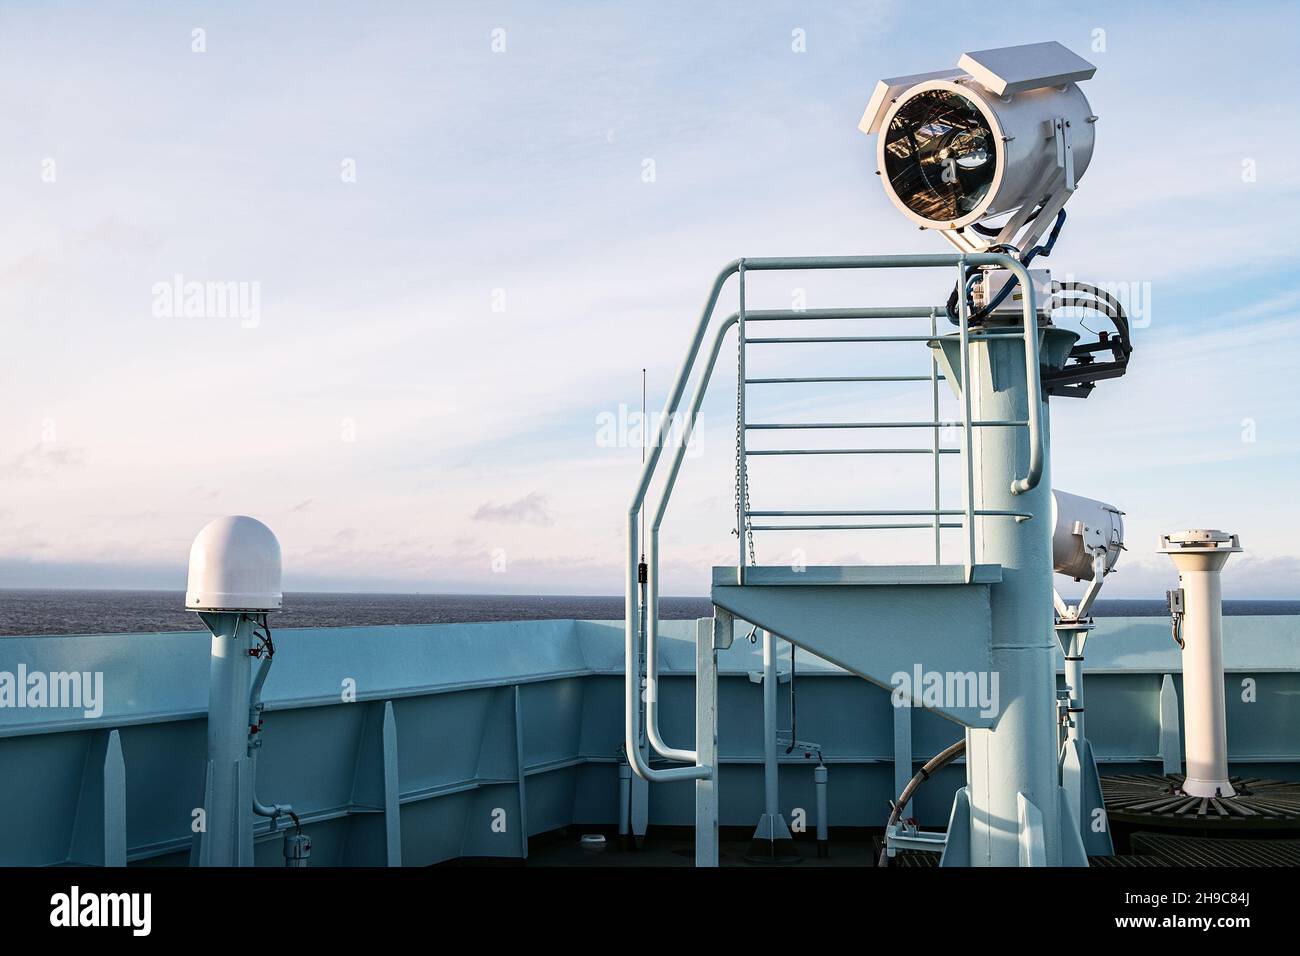 Ship's bell and signal light on the ship Stock Photo